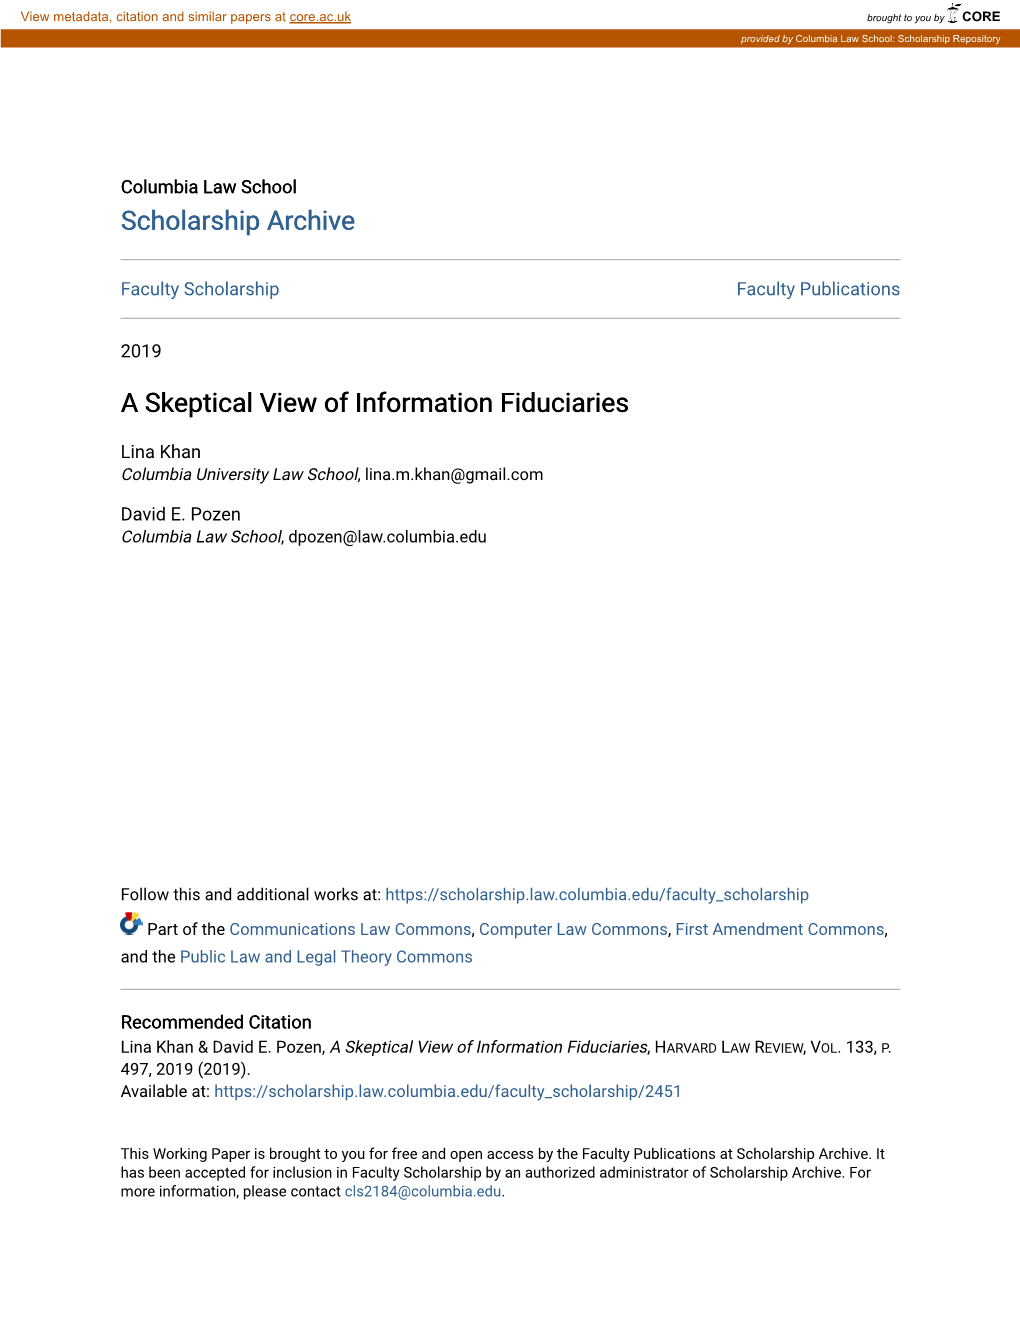 A Skeptical View of Information Fiduciaries